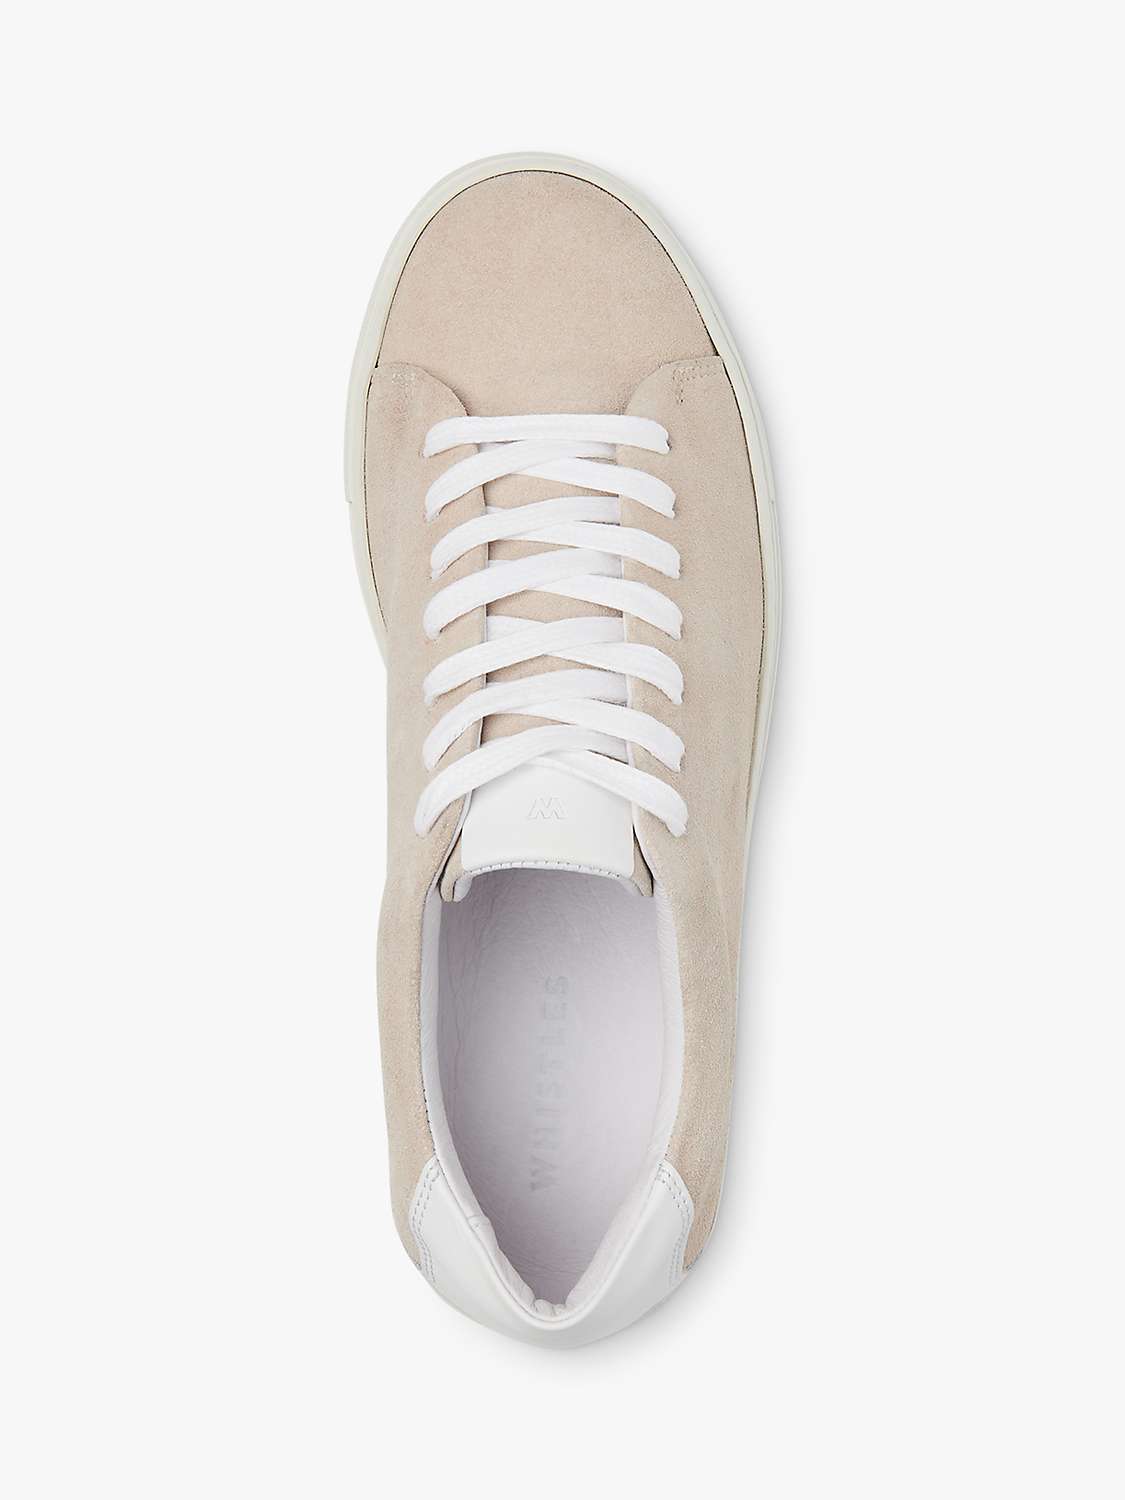 Buy Whistles Raife Minimal Leather Trainers, Grey Online at johnlewis.com